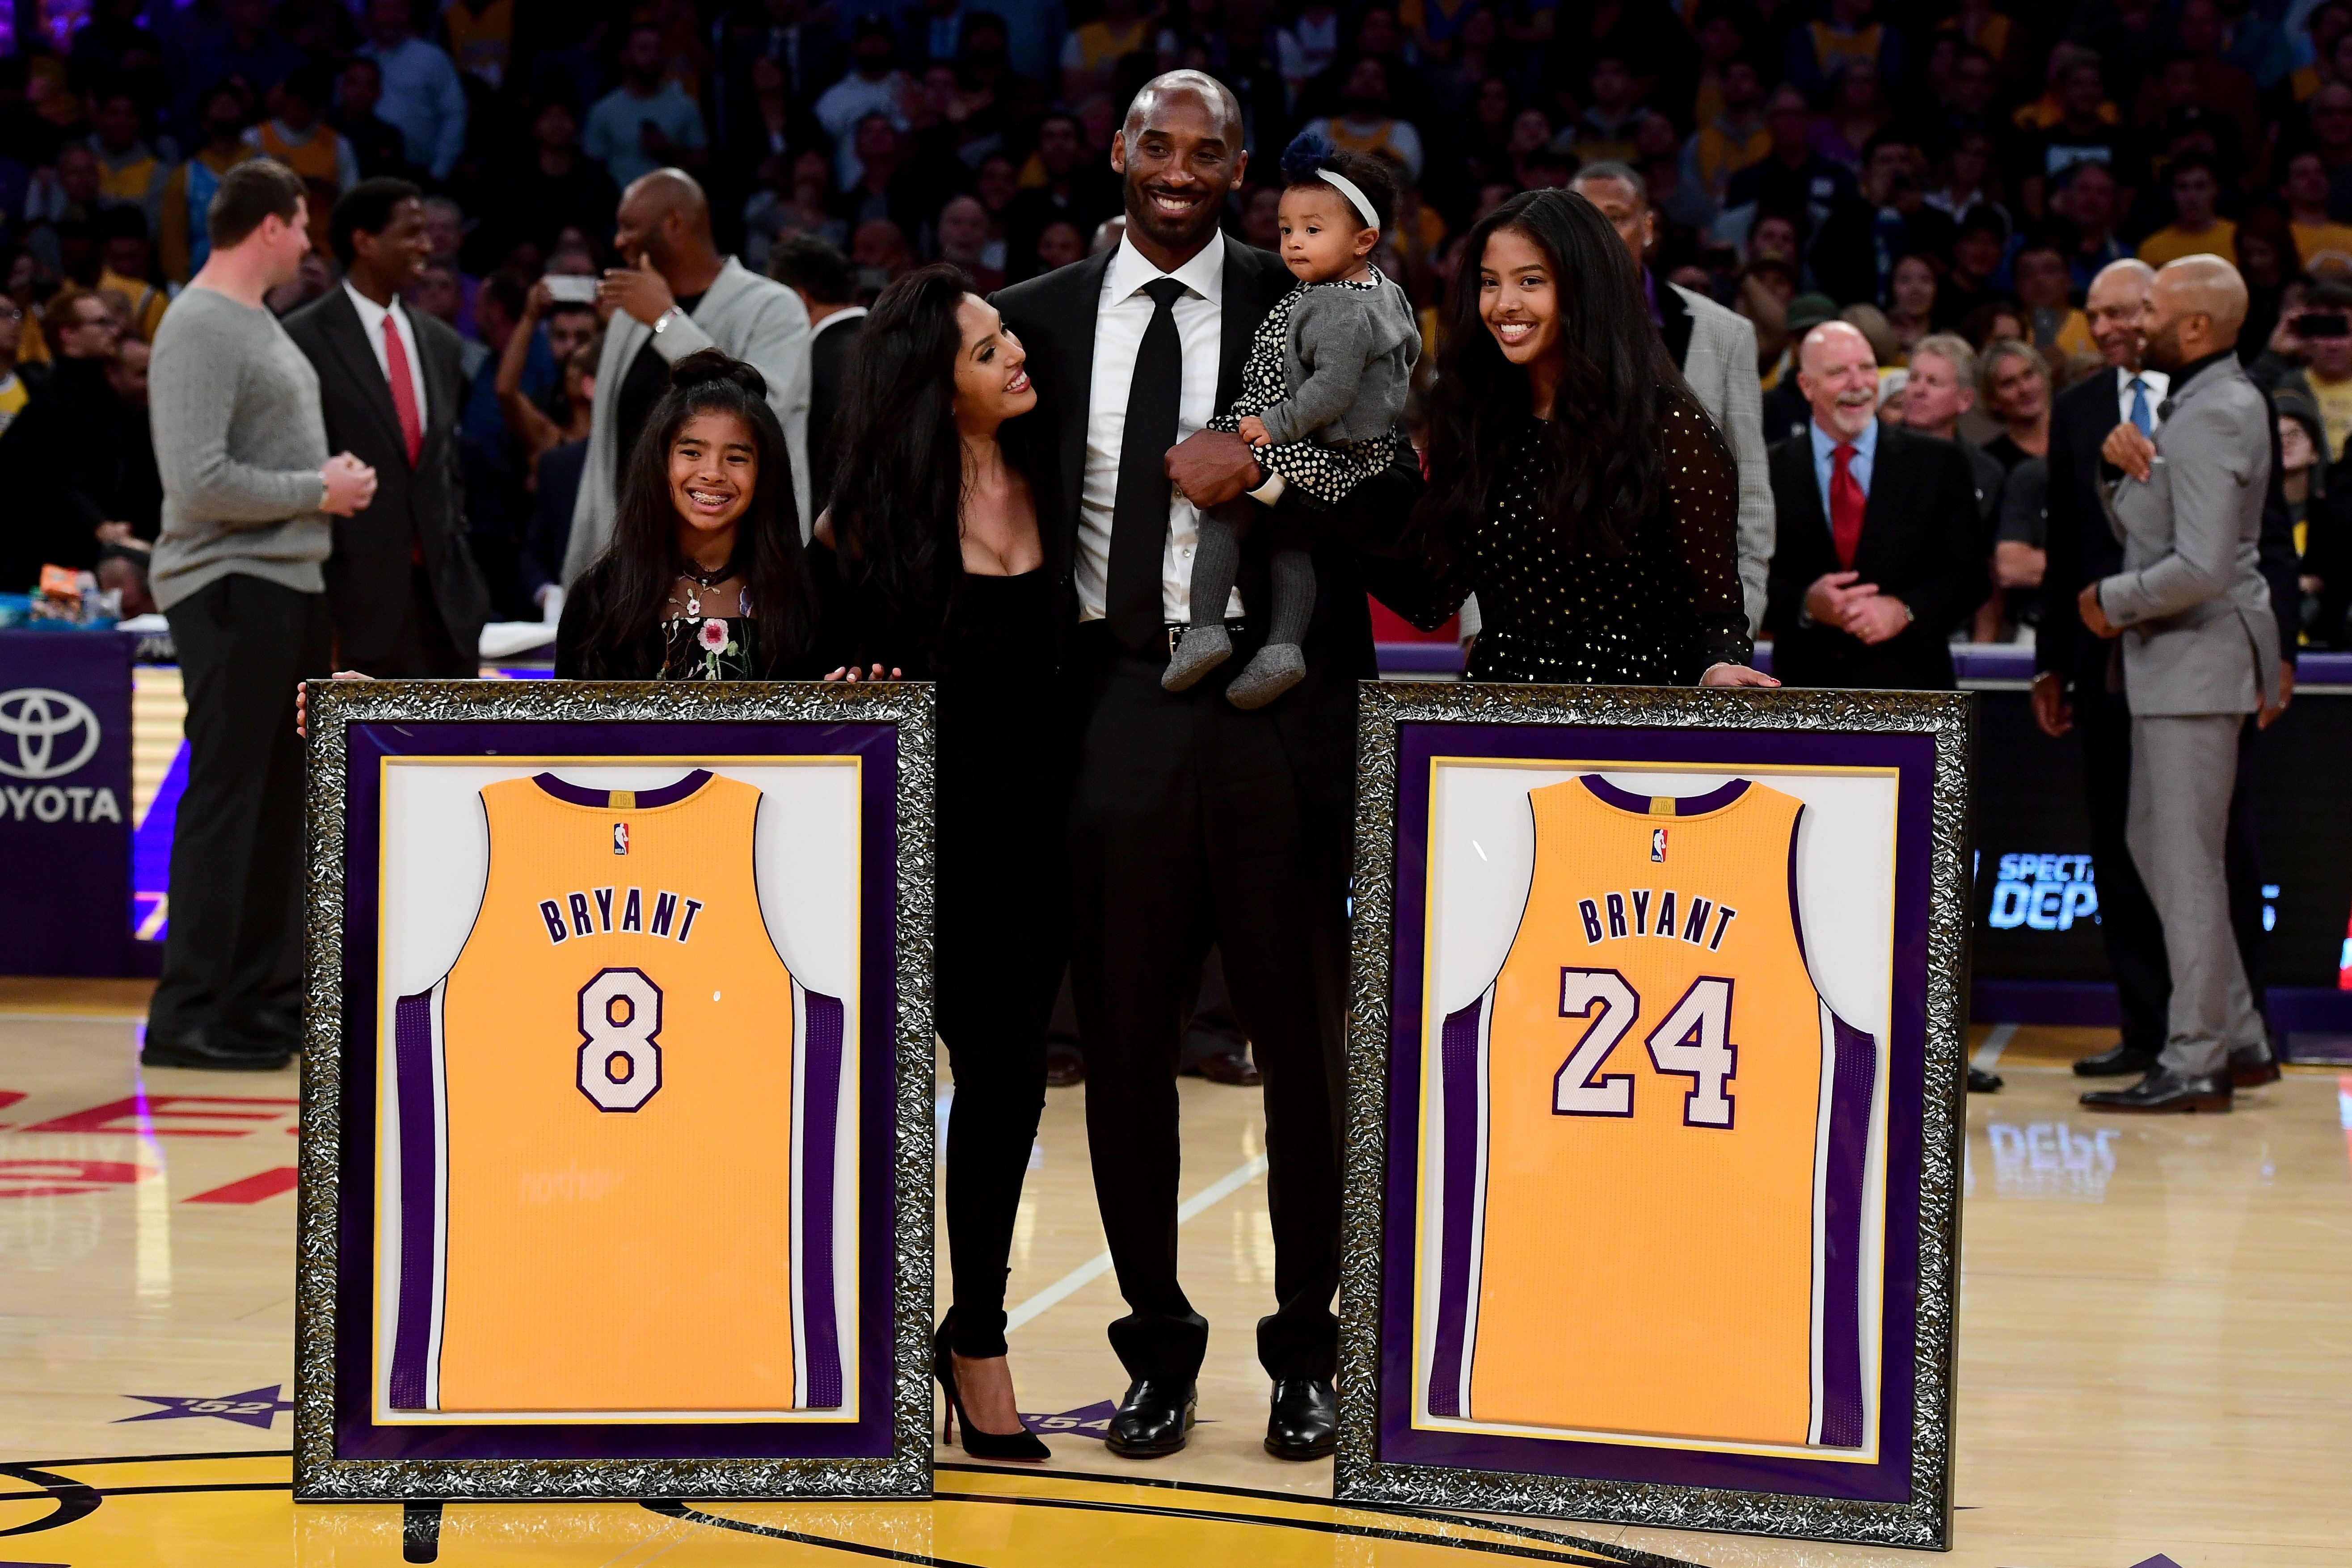 Kobe Bryant poses with his family after both his #8 and #24 Los Angeles Lakers jerseys are retired at Staples Center on Dec. 18, 2017 in California | Photo: Getty Images